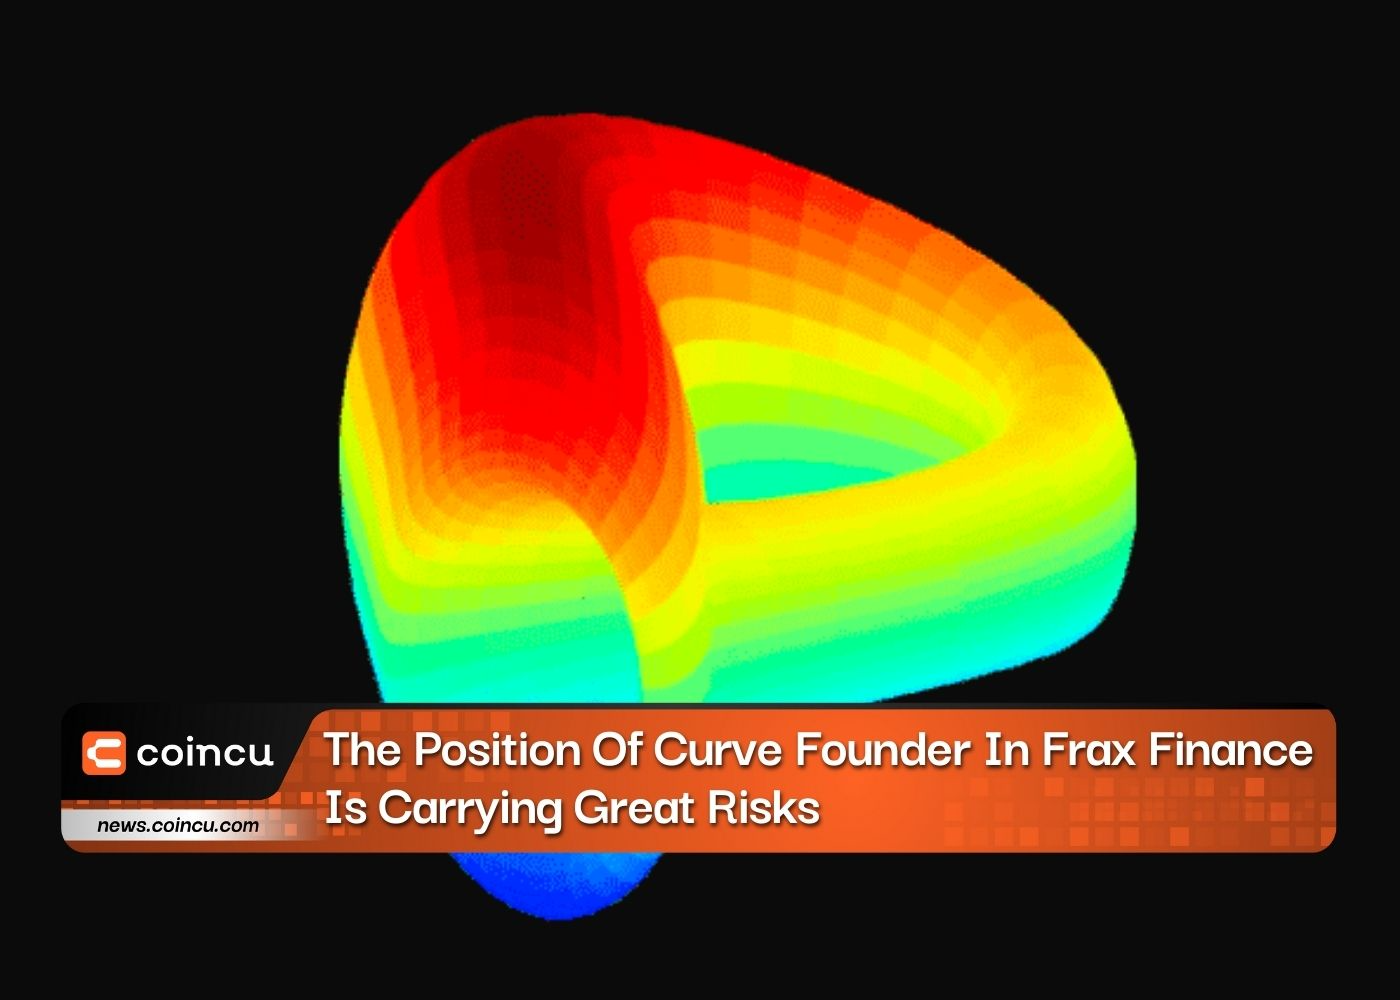 The Position Of Curve Founder In Frax Finance Is Carrying Great Risks